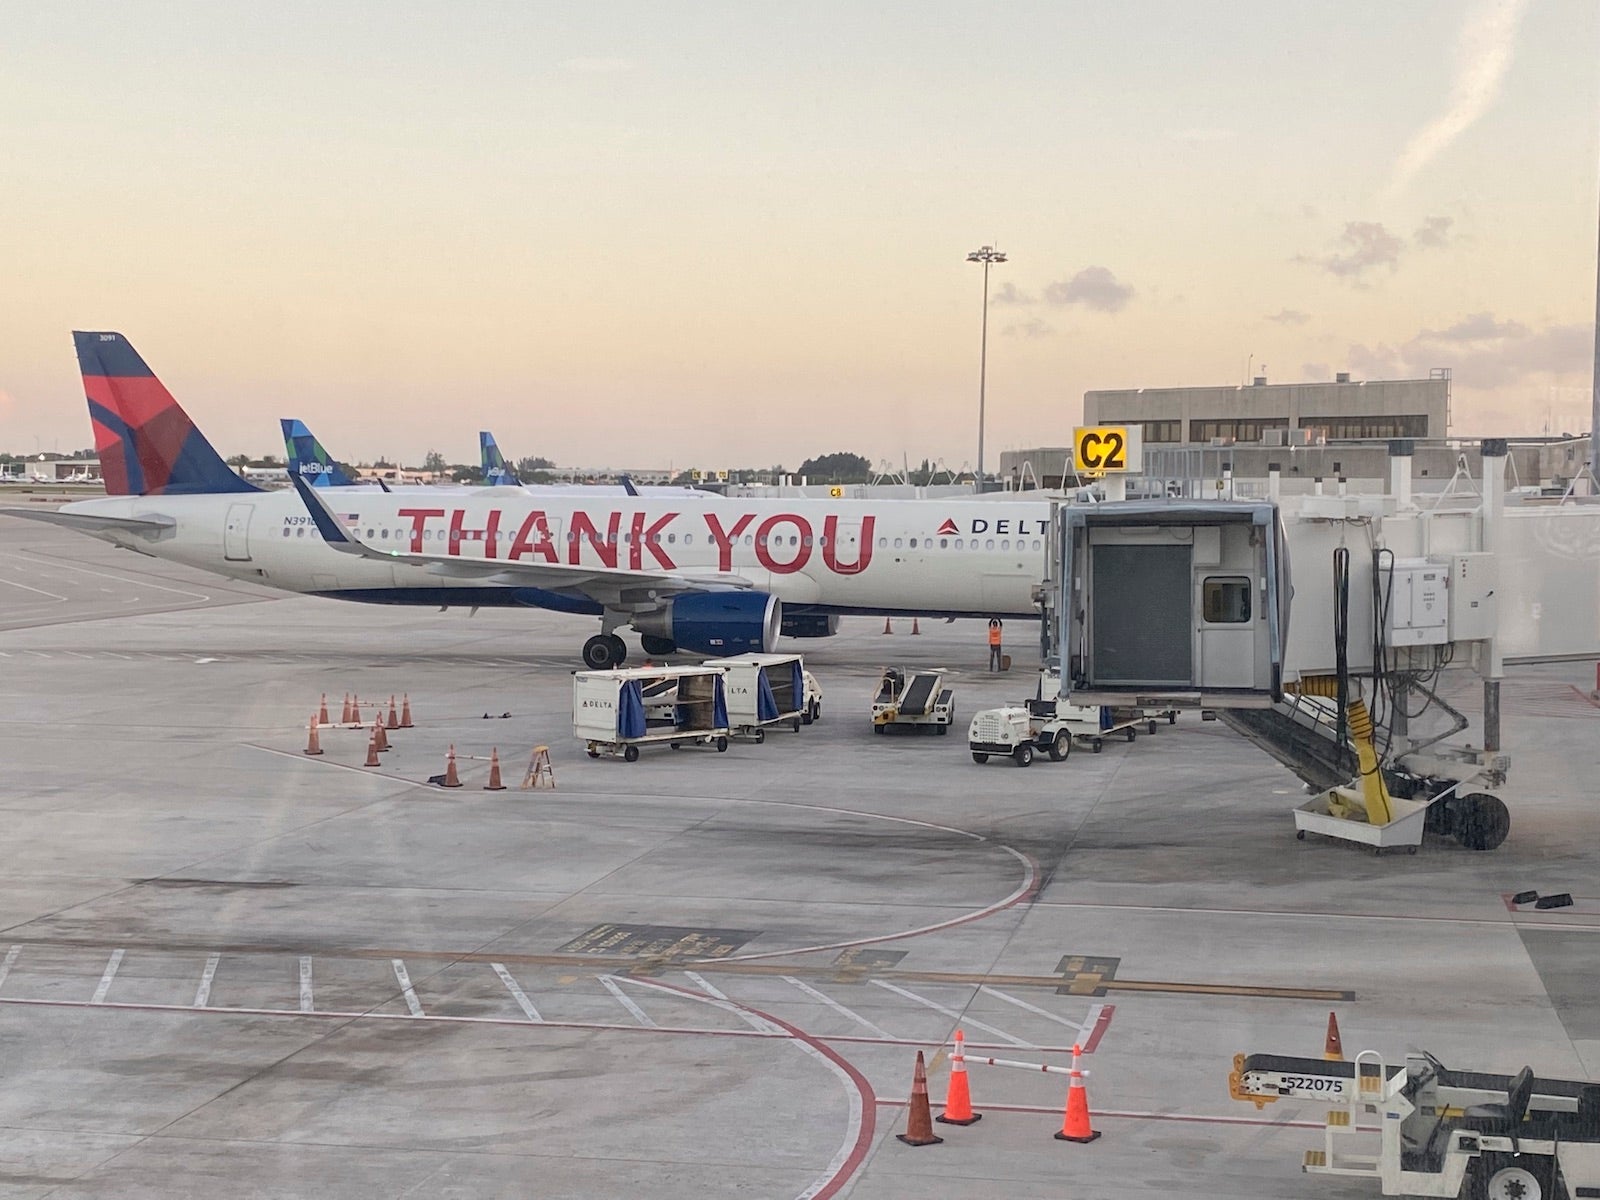 Delta airplane with Thank You message on side, being loaded with baggage before taking off, West Palm Beach Gardens Airport, Florida